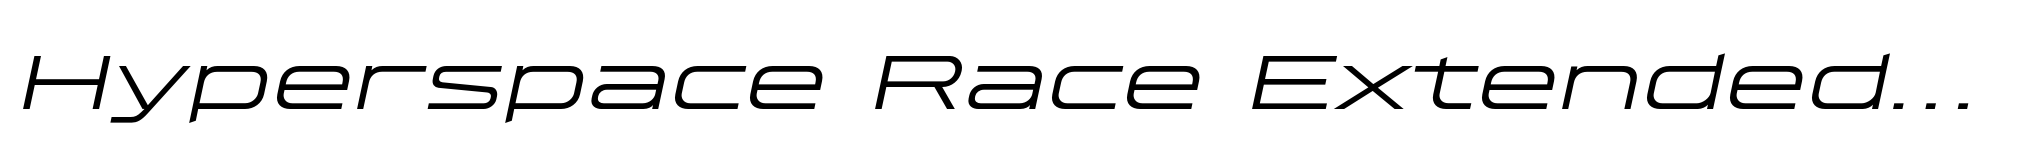 Hyperspace Race Extended Light Italic image